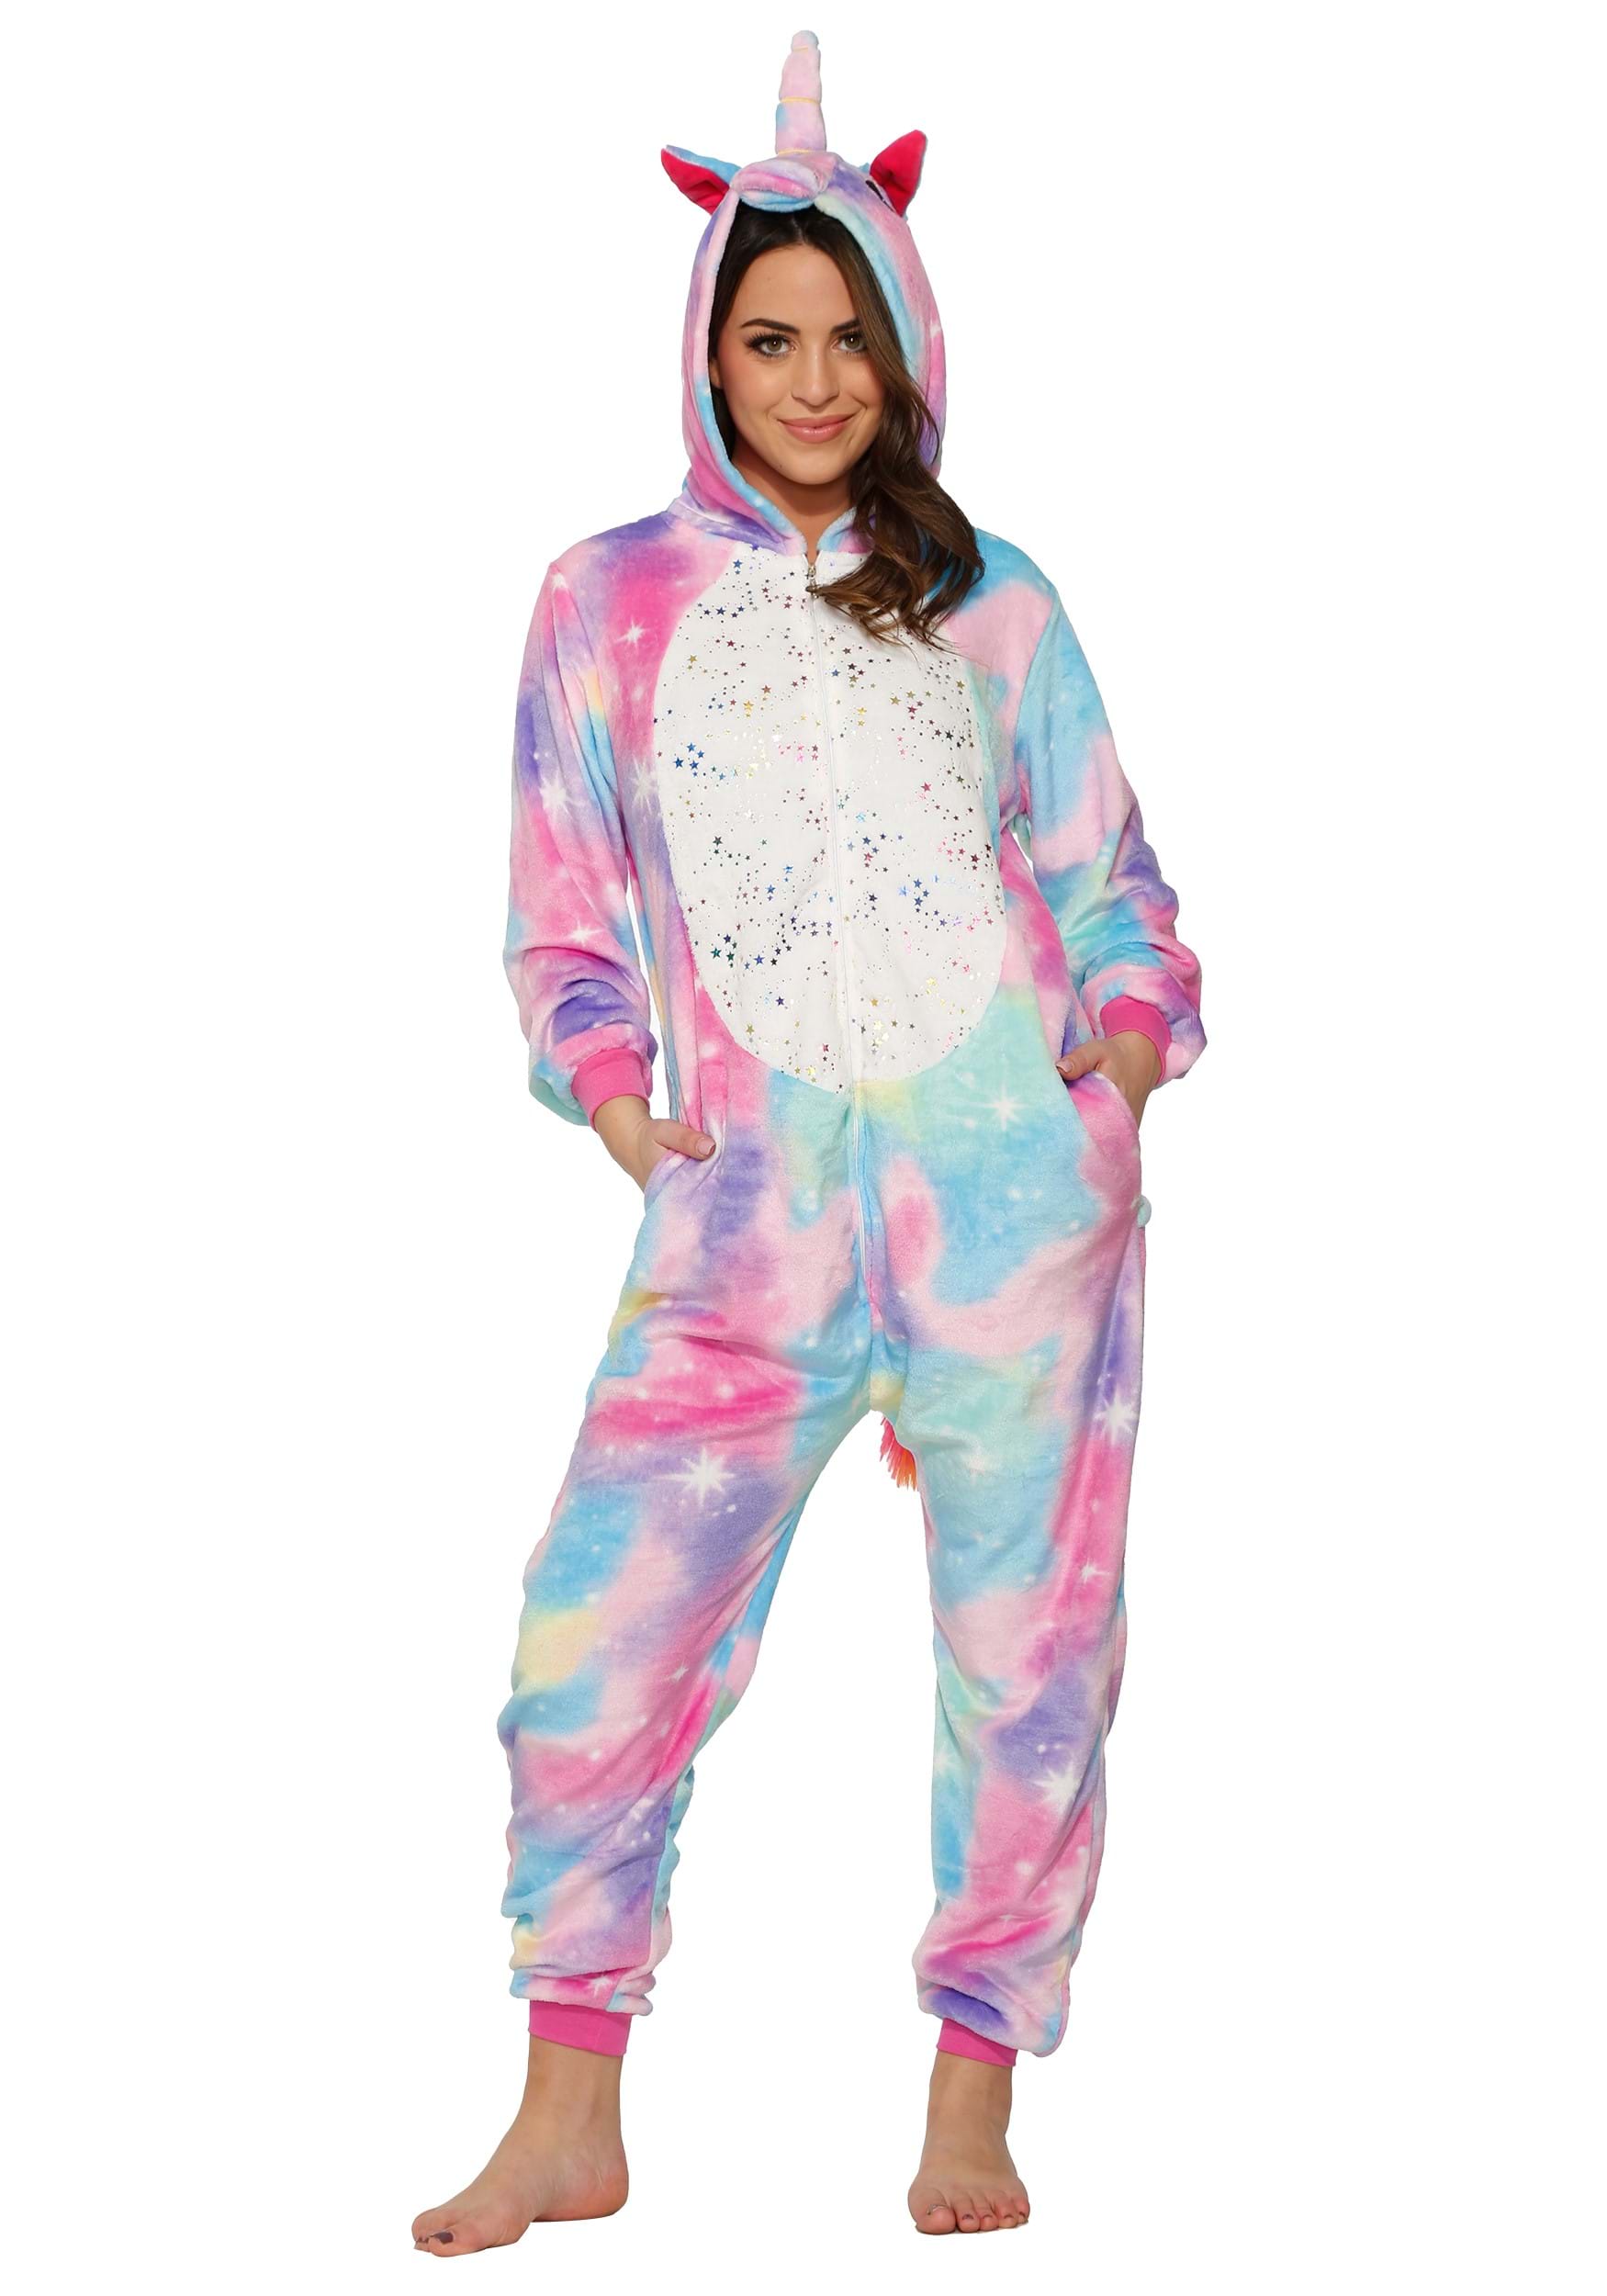 https://images.halloweencostumes.com/products/83526/1-1/adult-cotton-candy-galaxy-unicorn-onesie.jpg